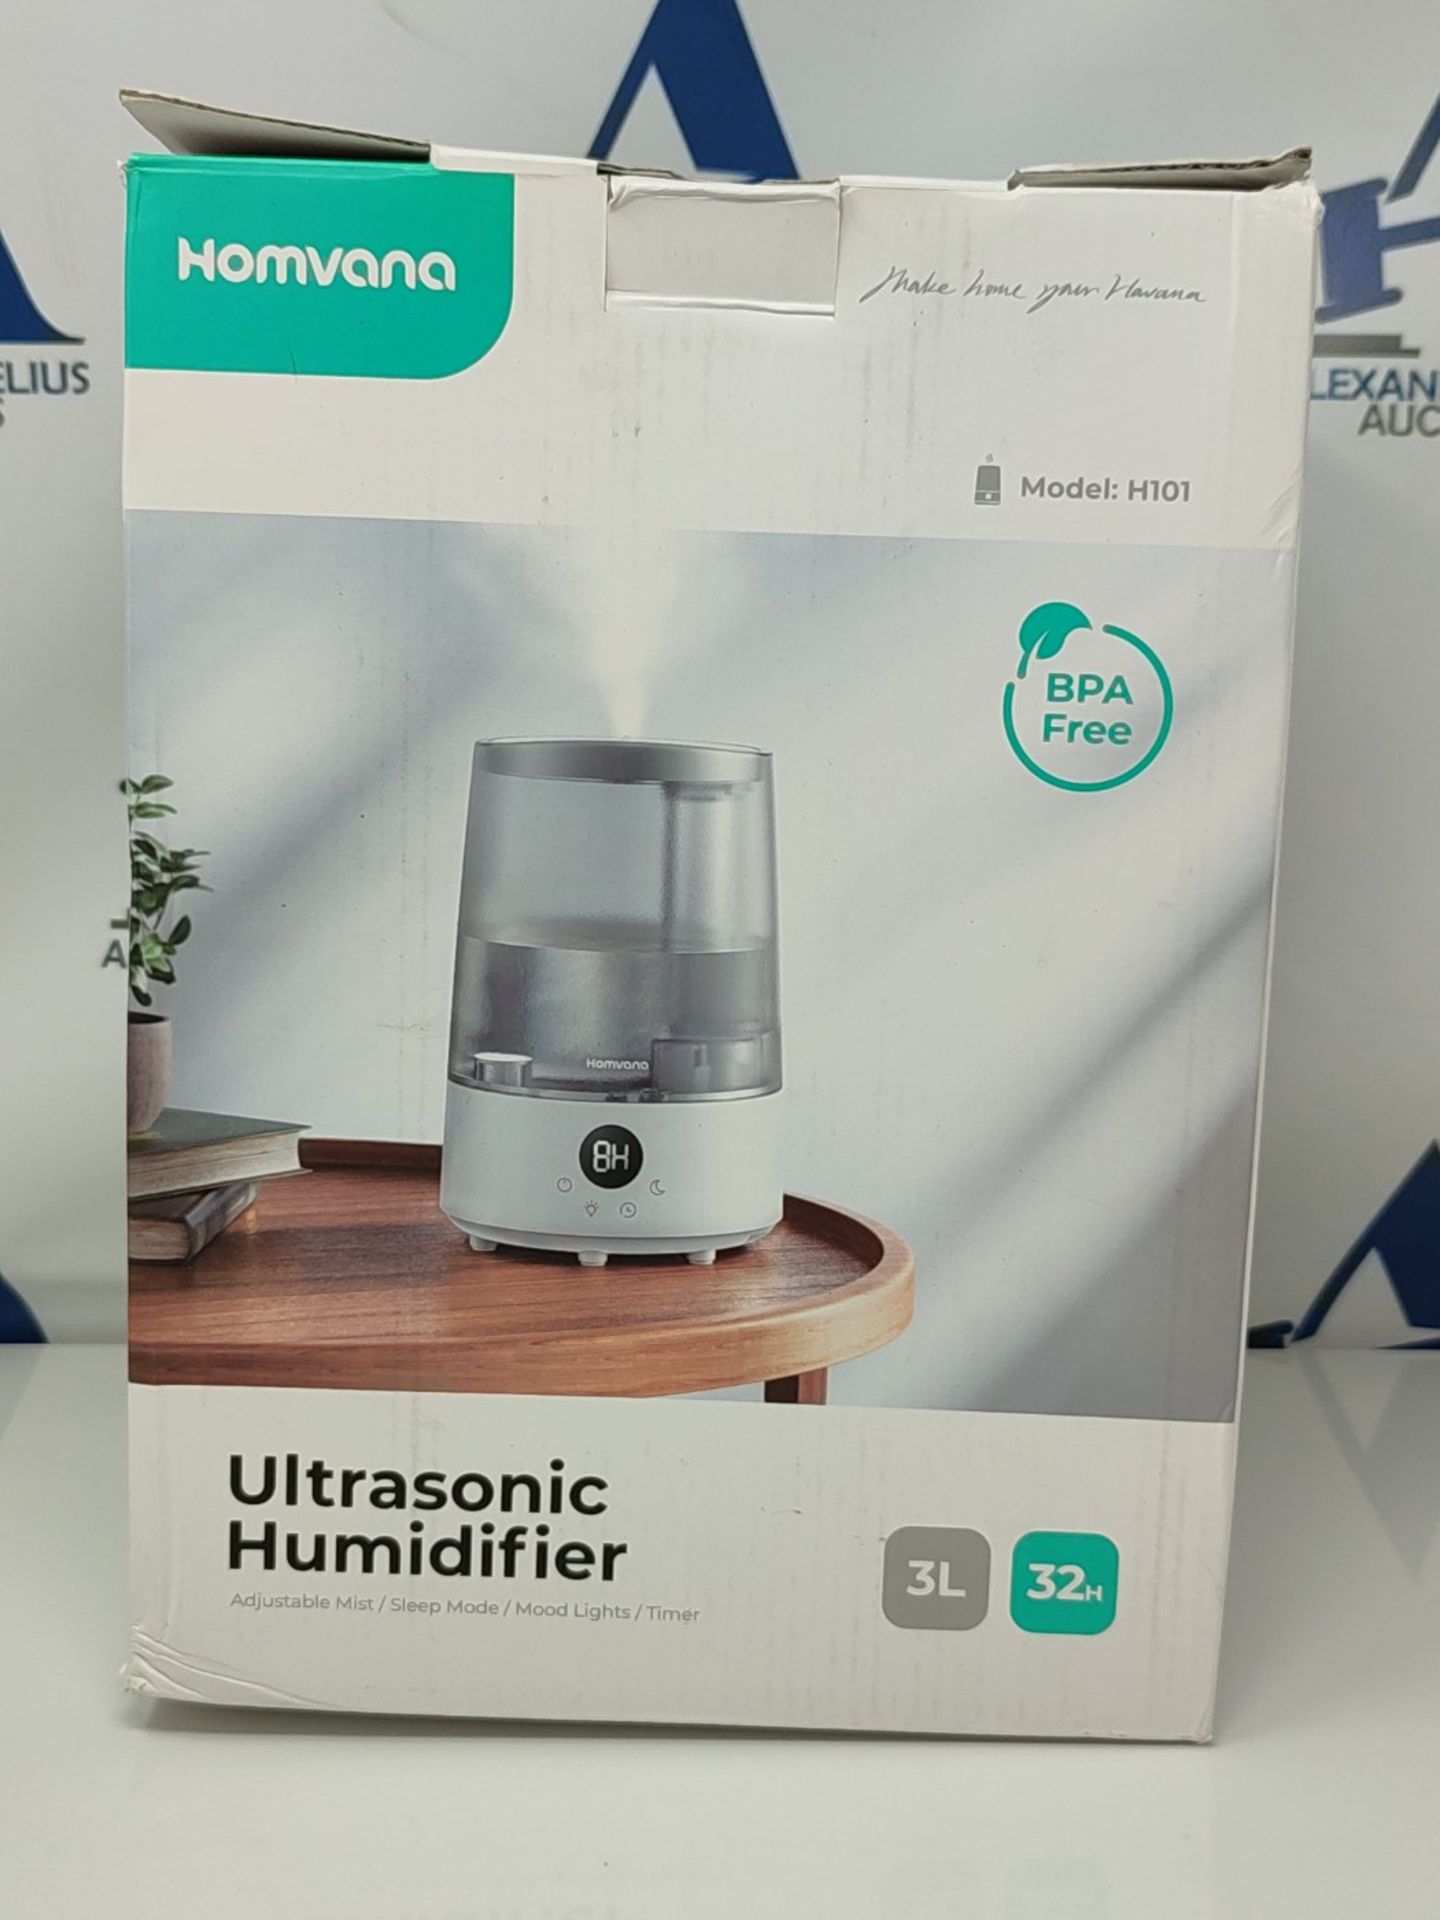 Diffuser for Home, Homvana 3L Cool Mist Humidifier for Bedroom Home Baby Nursery, 32H